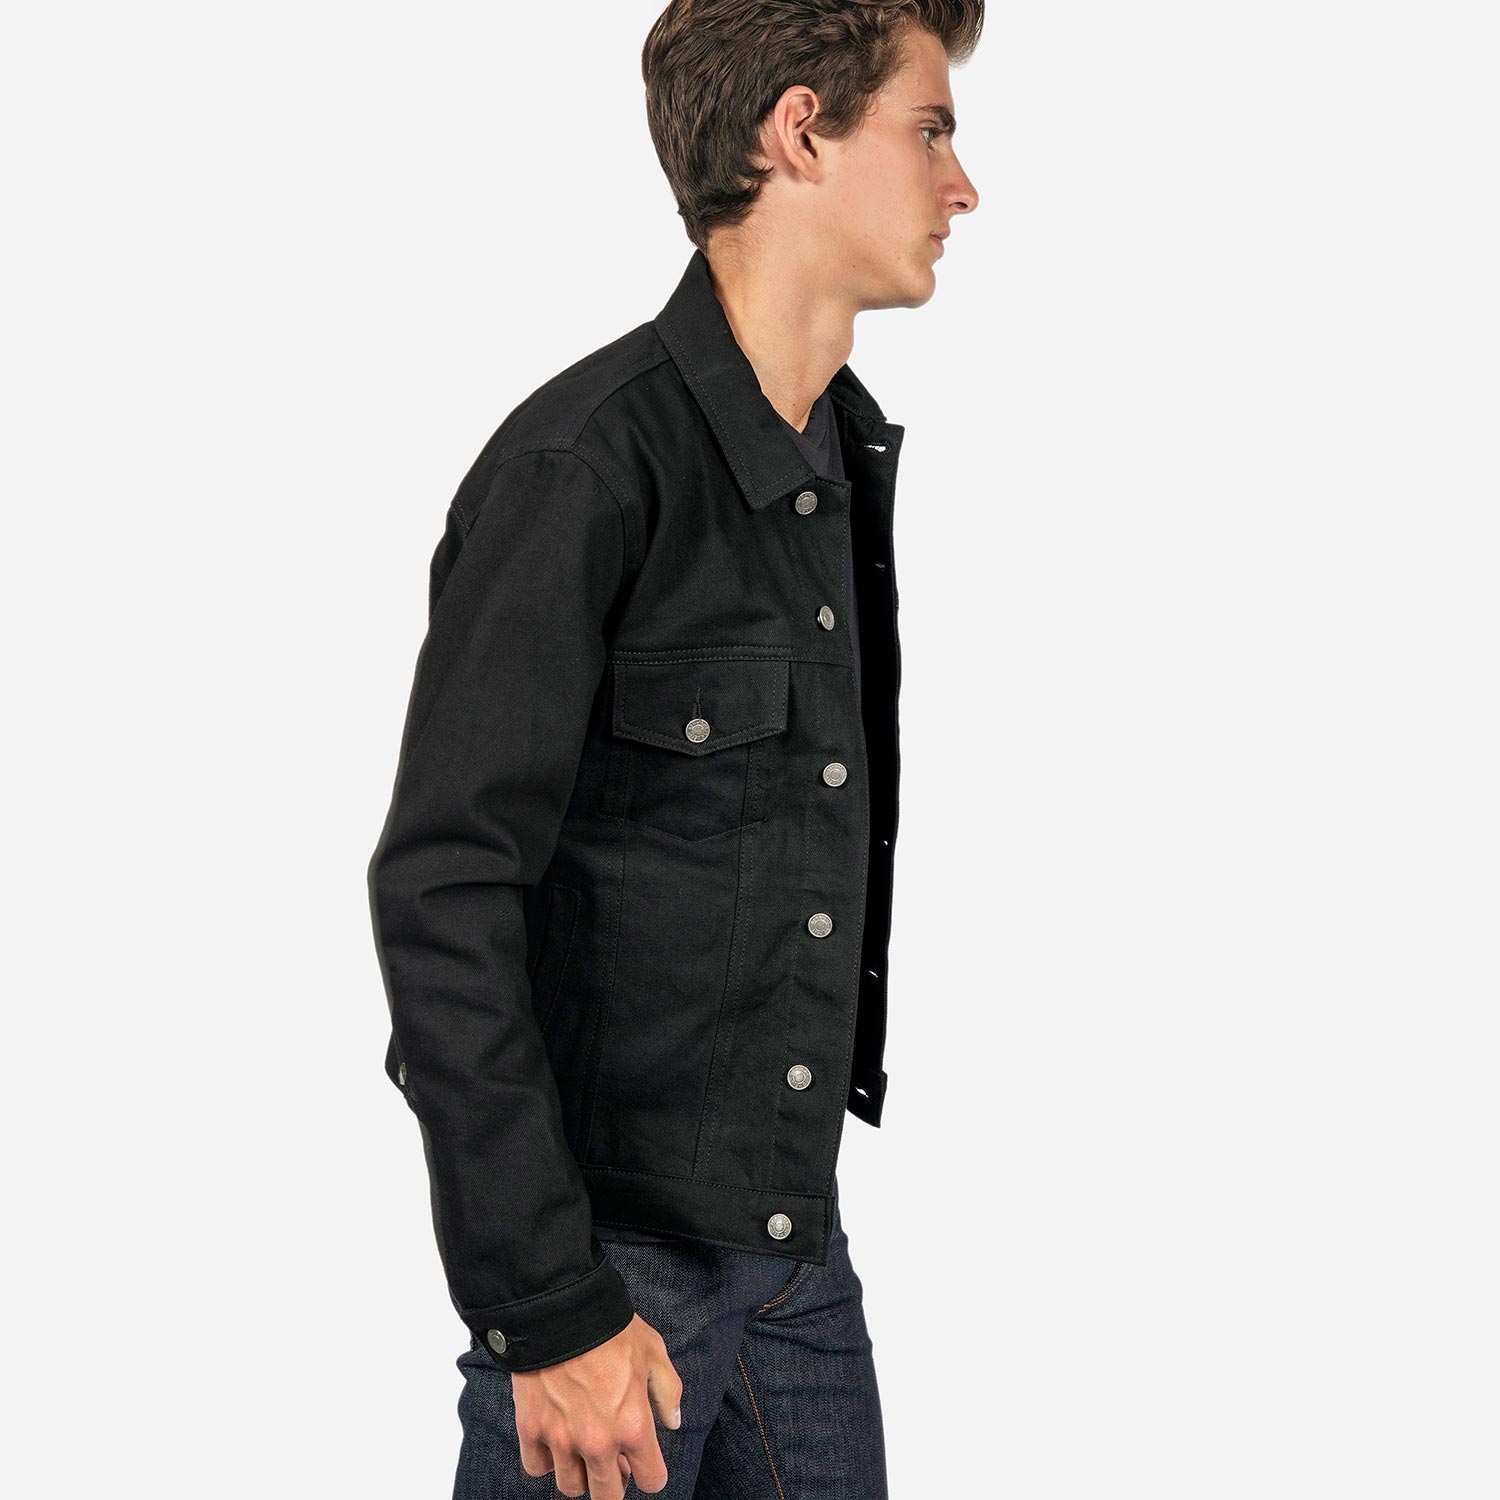 Straight to Hell Men's Outsider New Dawn Twill Denim Jacket